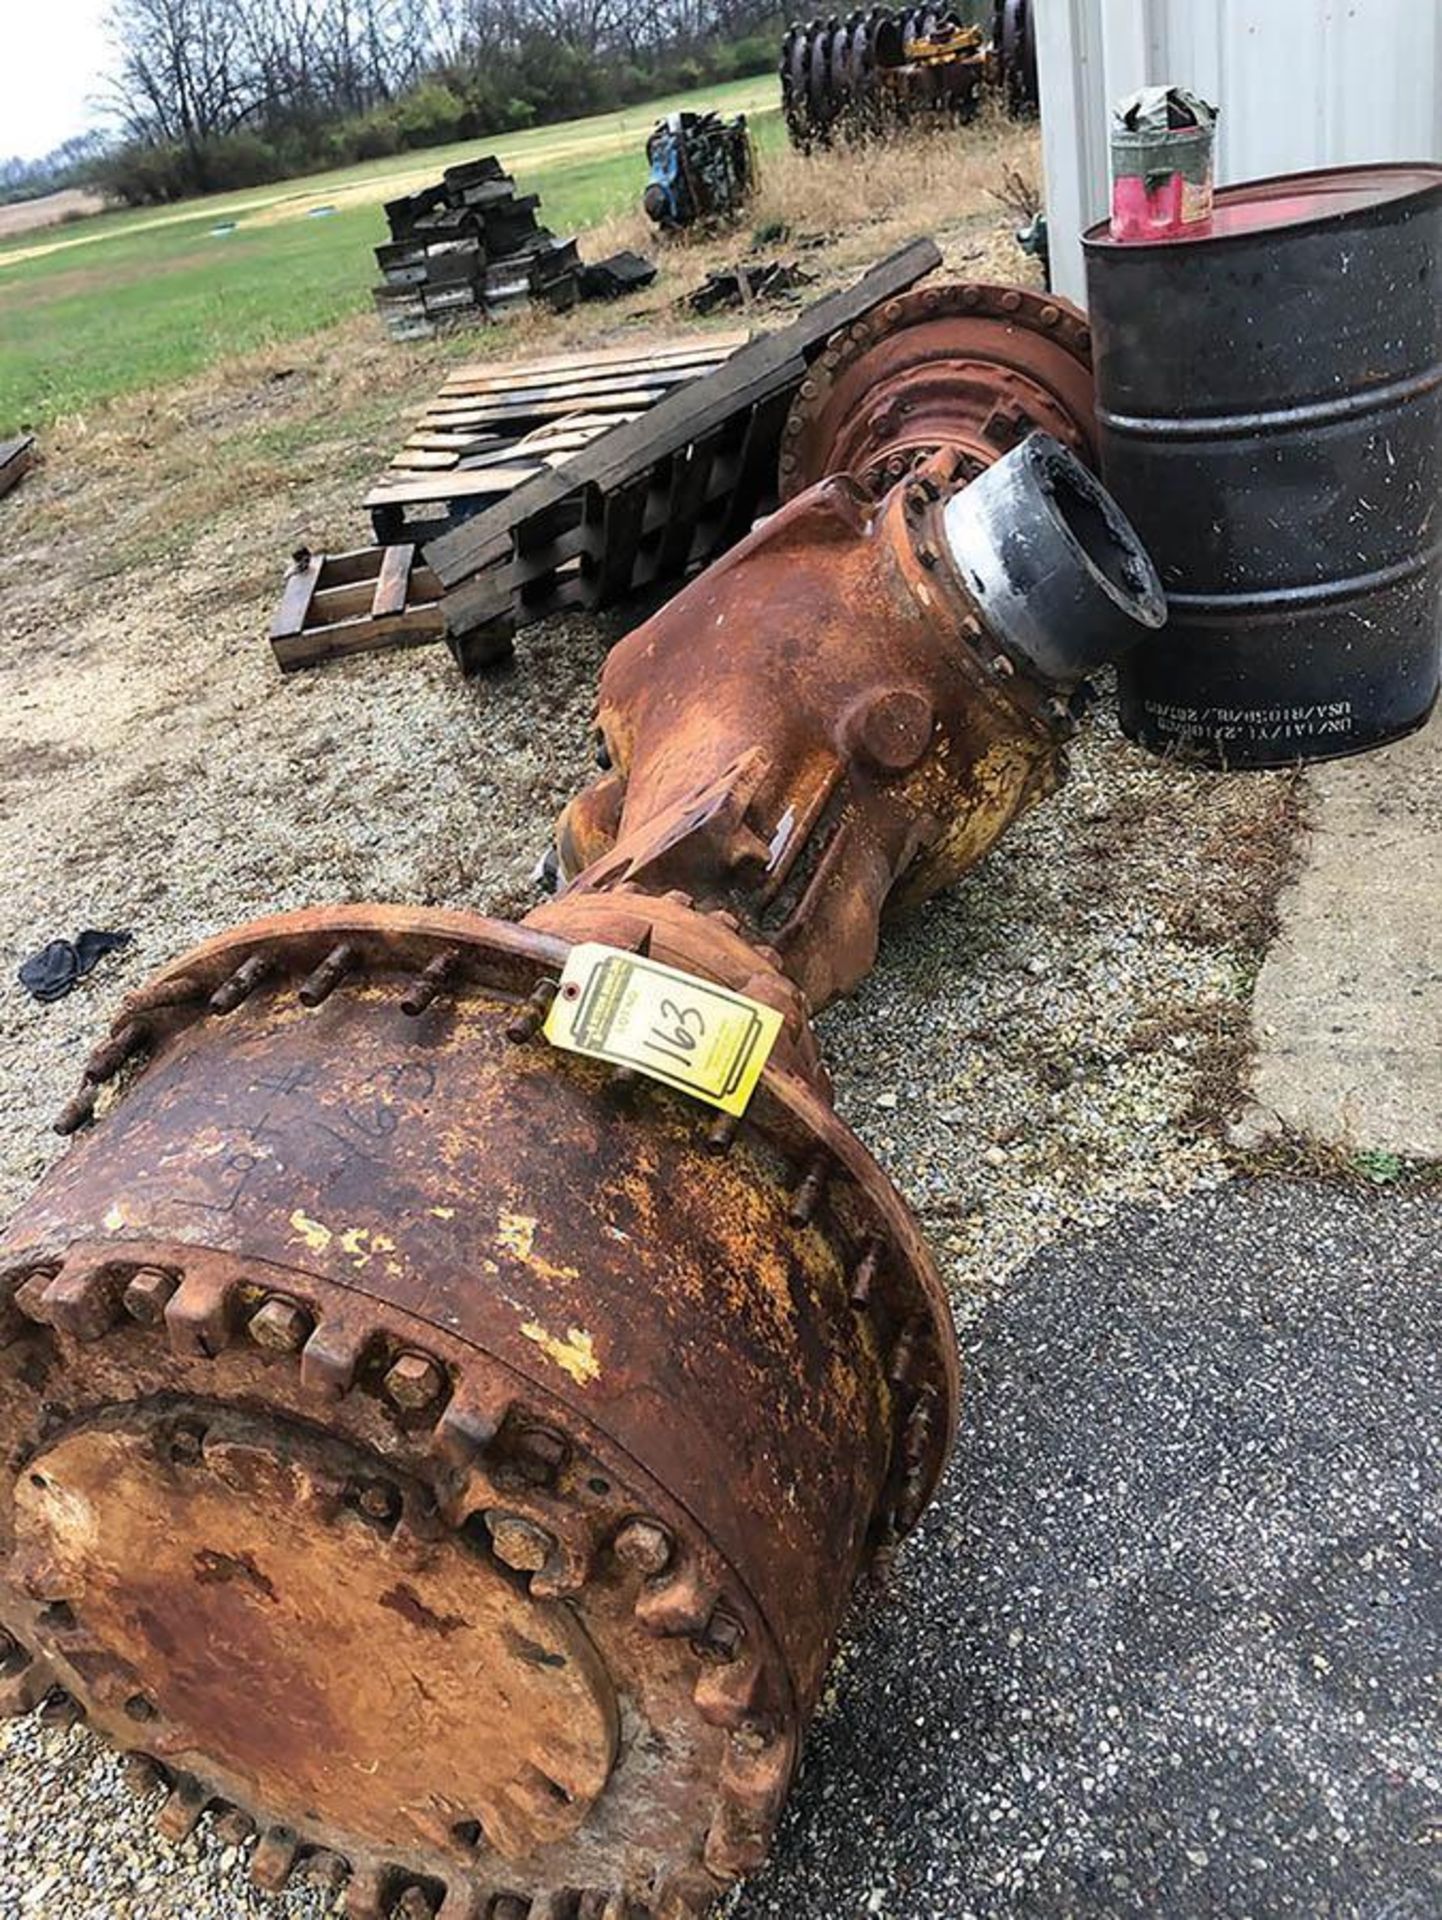 CATERPILLAR 826 DIFFERENTIAL REAR ENDS AND (2) FINAL DRIVES - Image 2 of 8